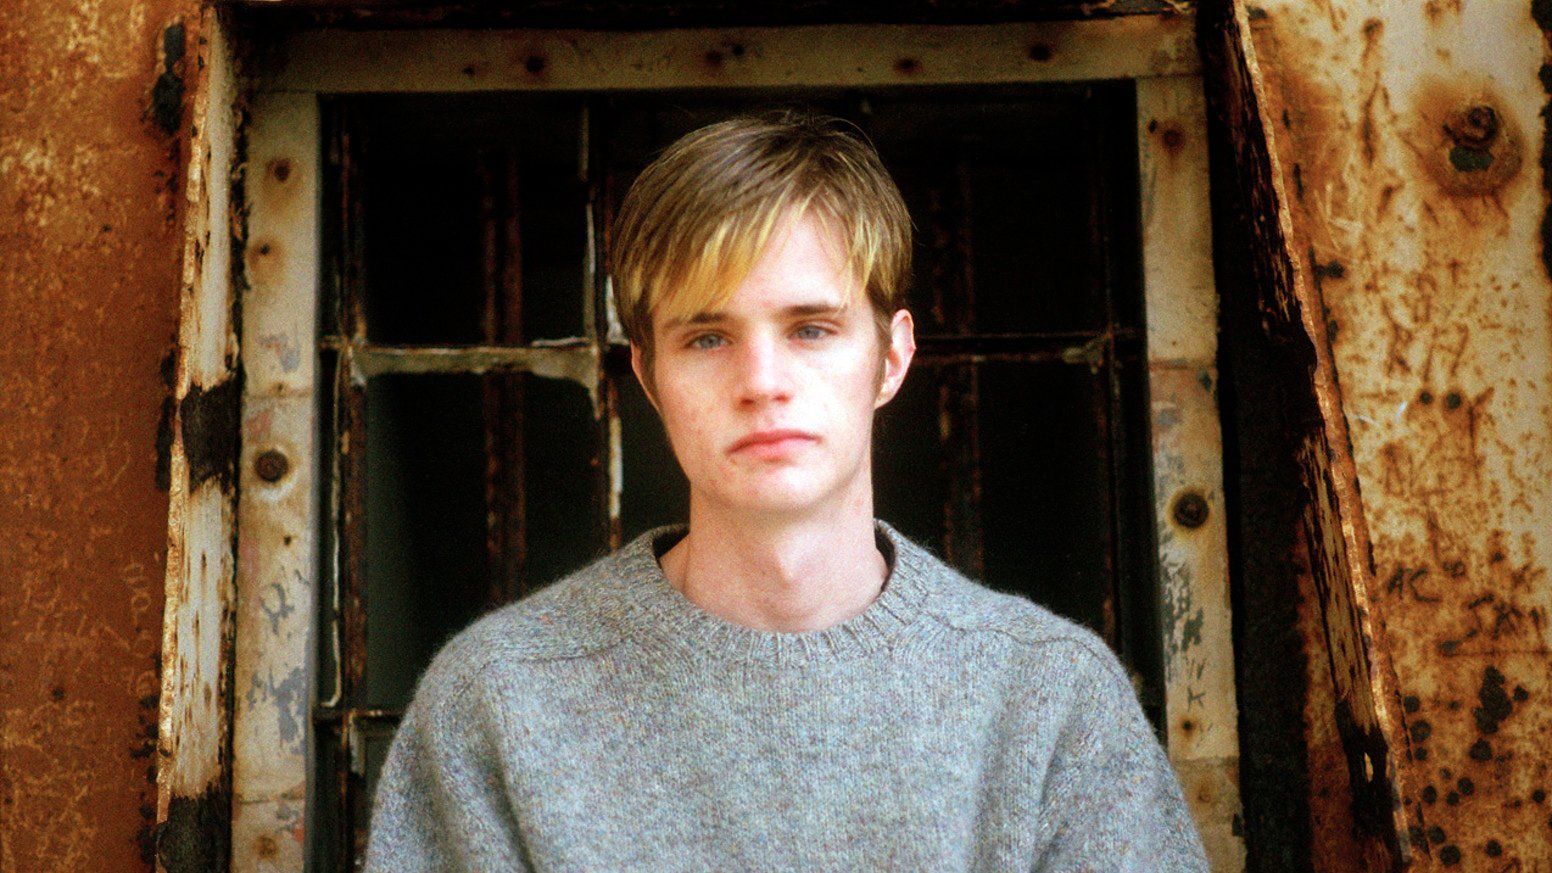 Featured image for “Students Commemorate Matthew Shepard, LGBTQ Hate Crime Victim, Through Song”